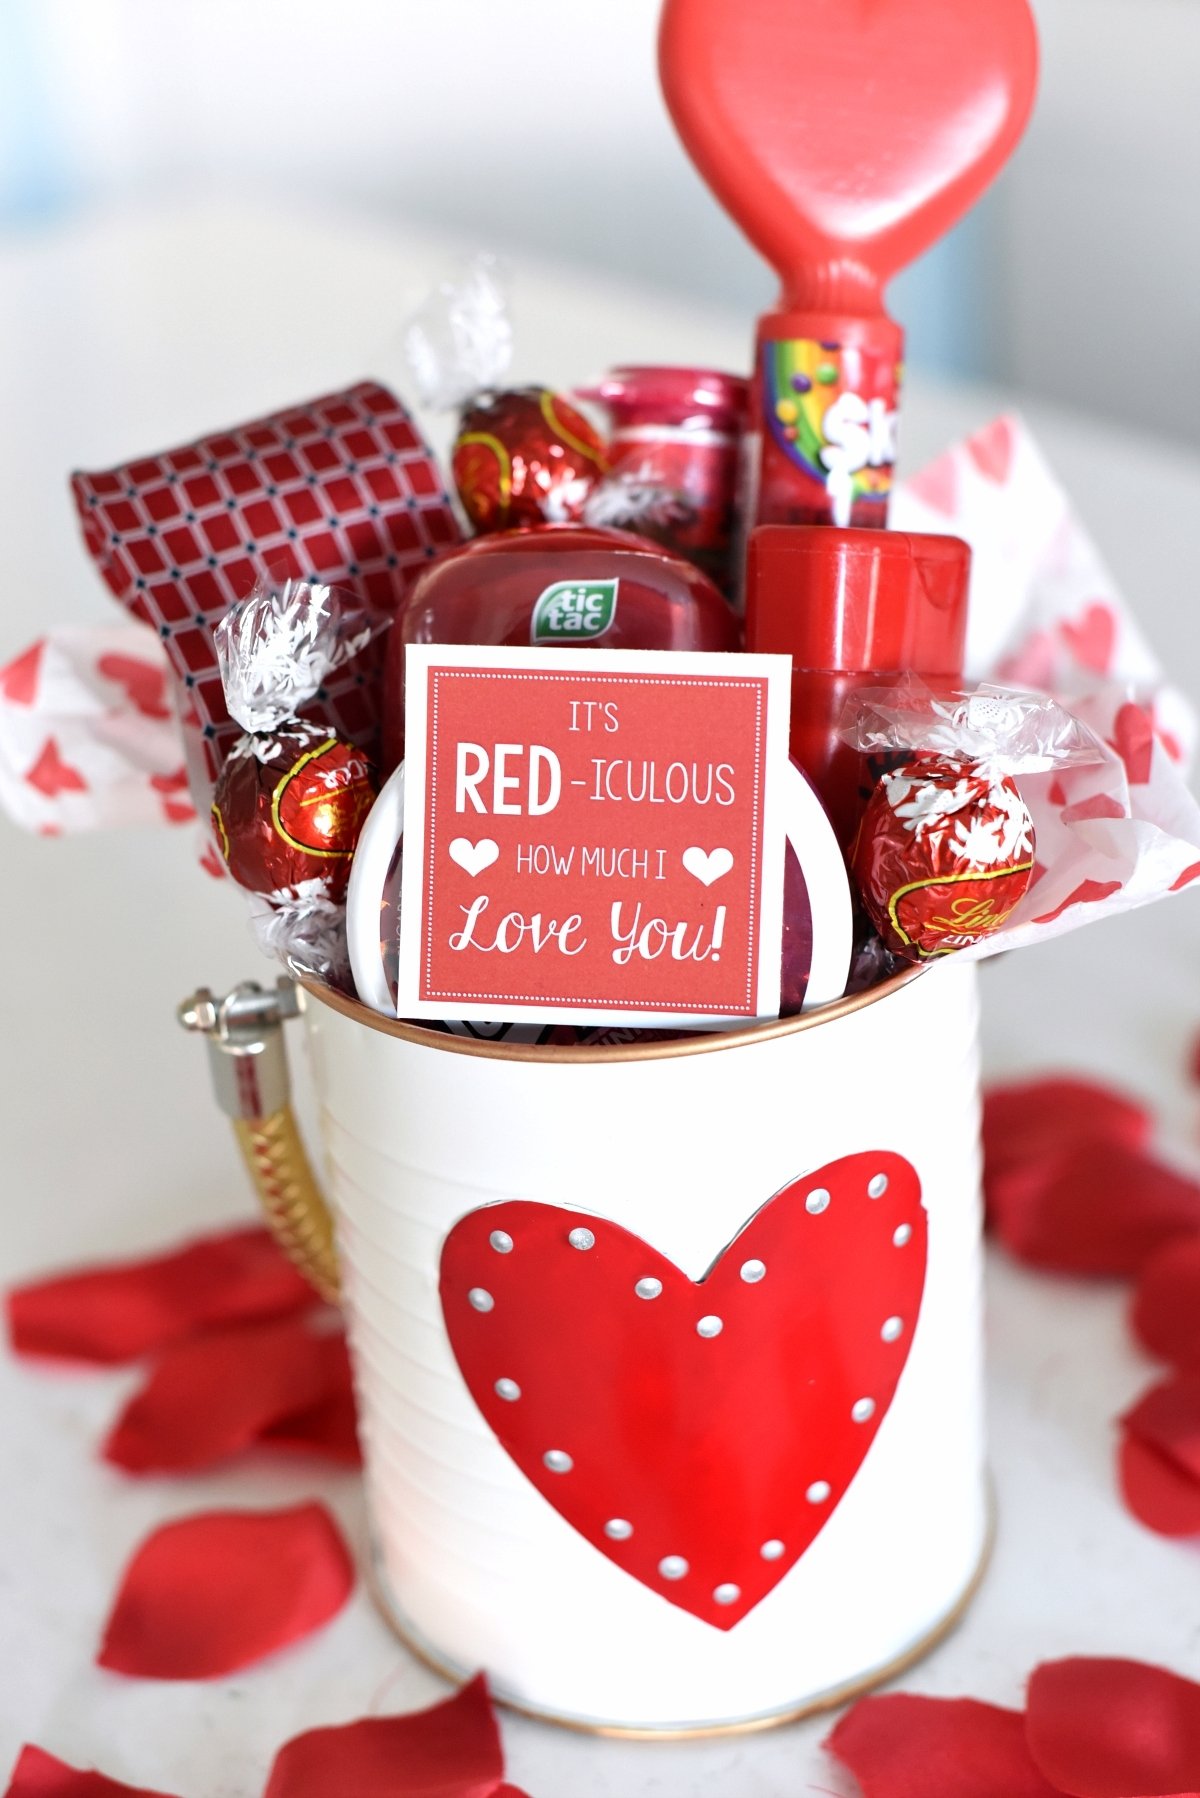 10 Elegant Valentines Day Gift Ideas For Wife cute valentines day gift idea red iculous basket 6 2022